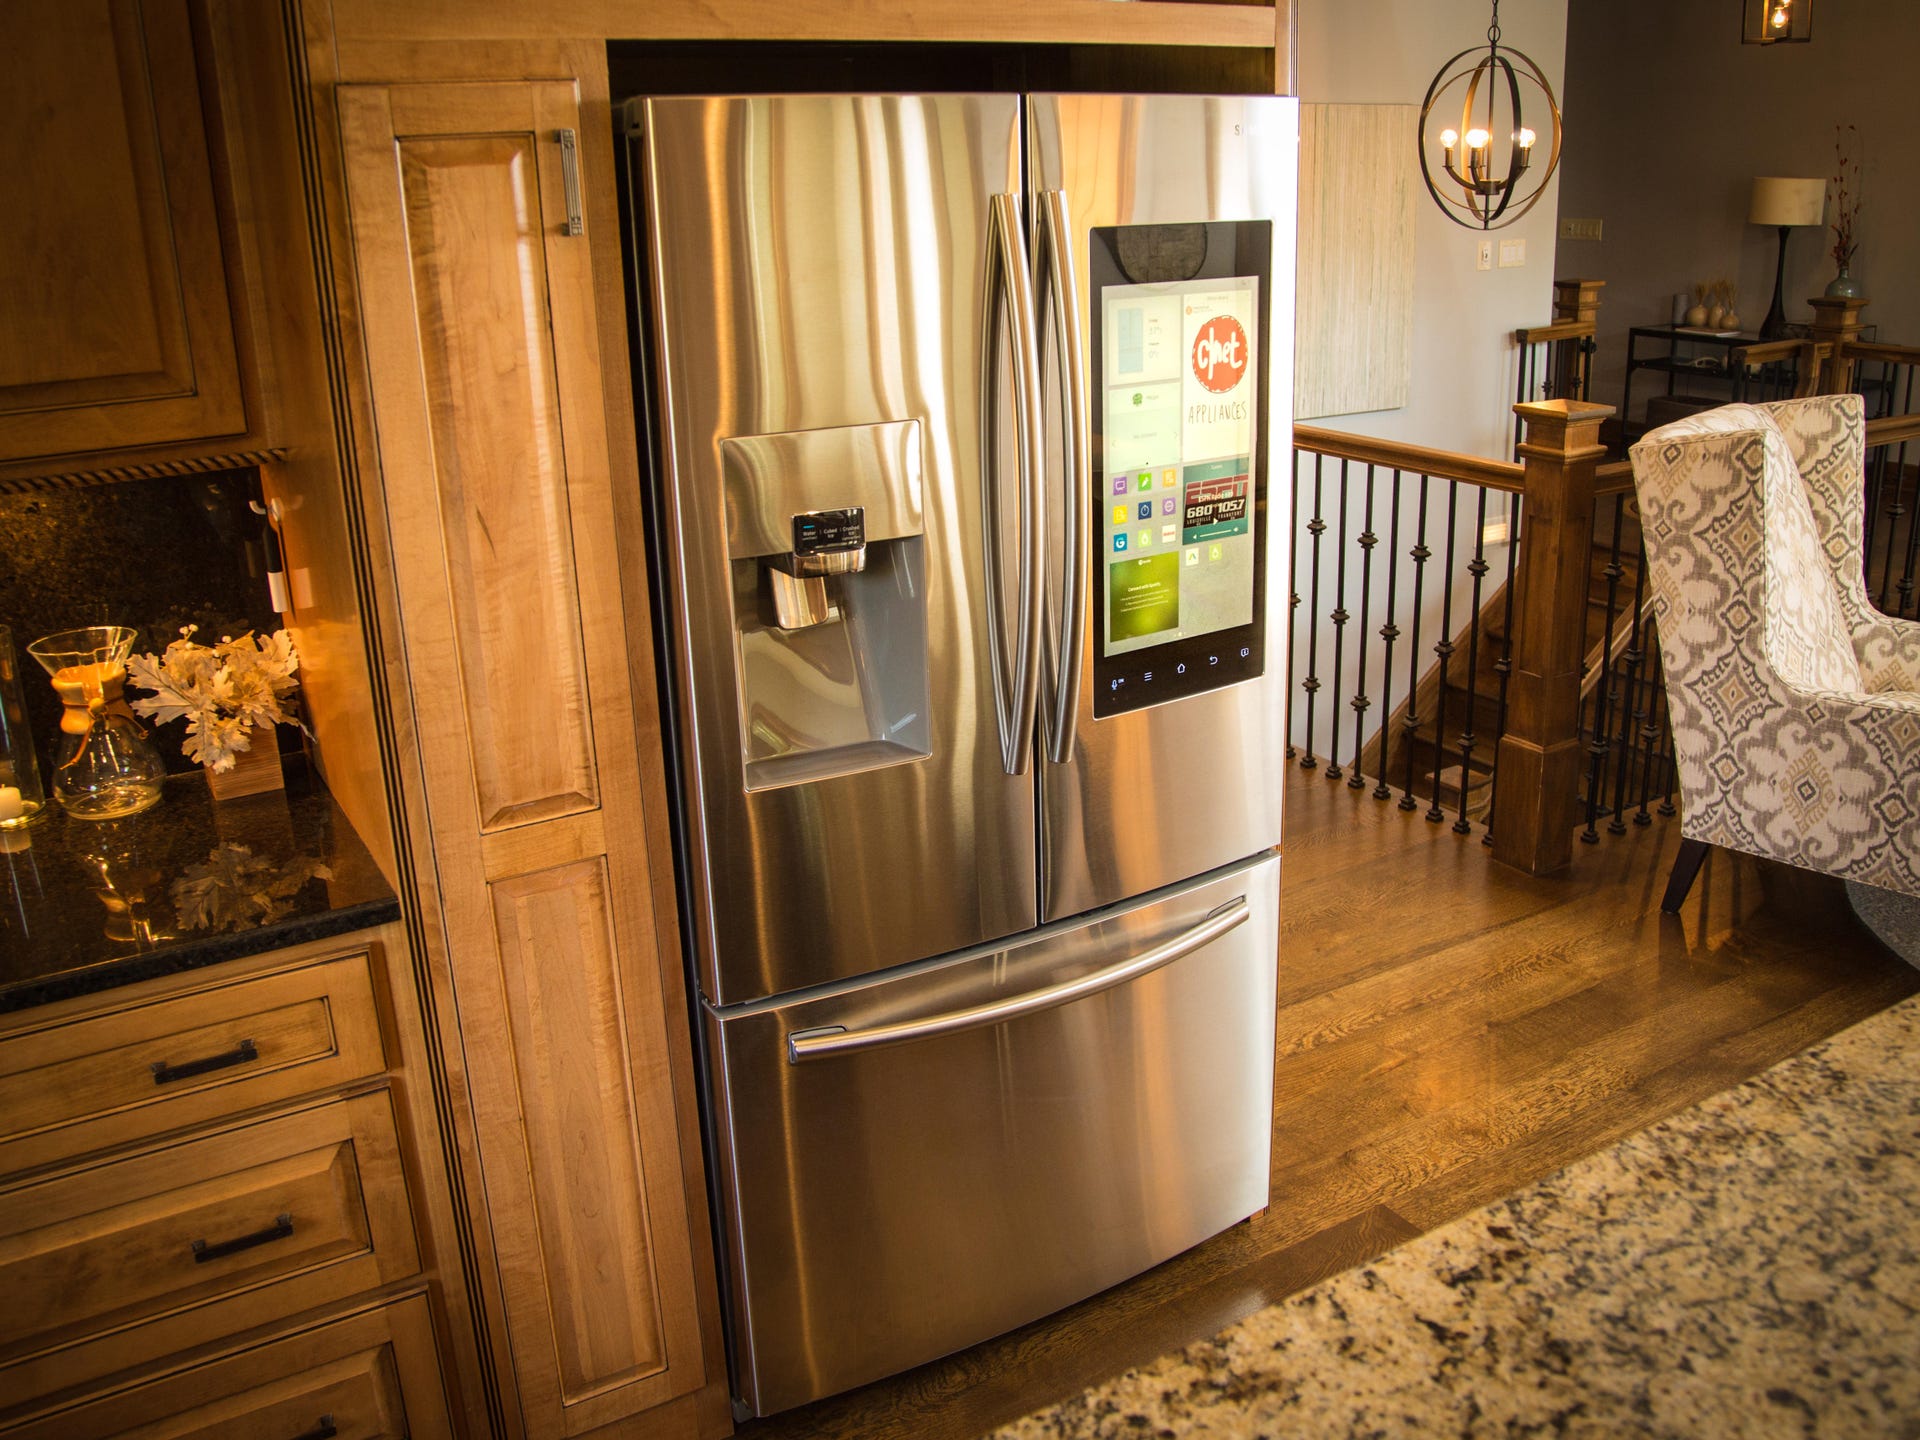 6 New Smart Refrigerator Features Your Kitchen Needs